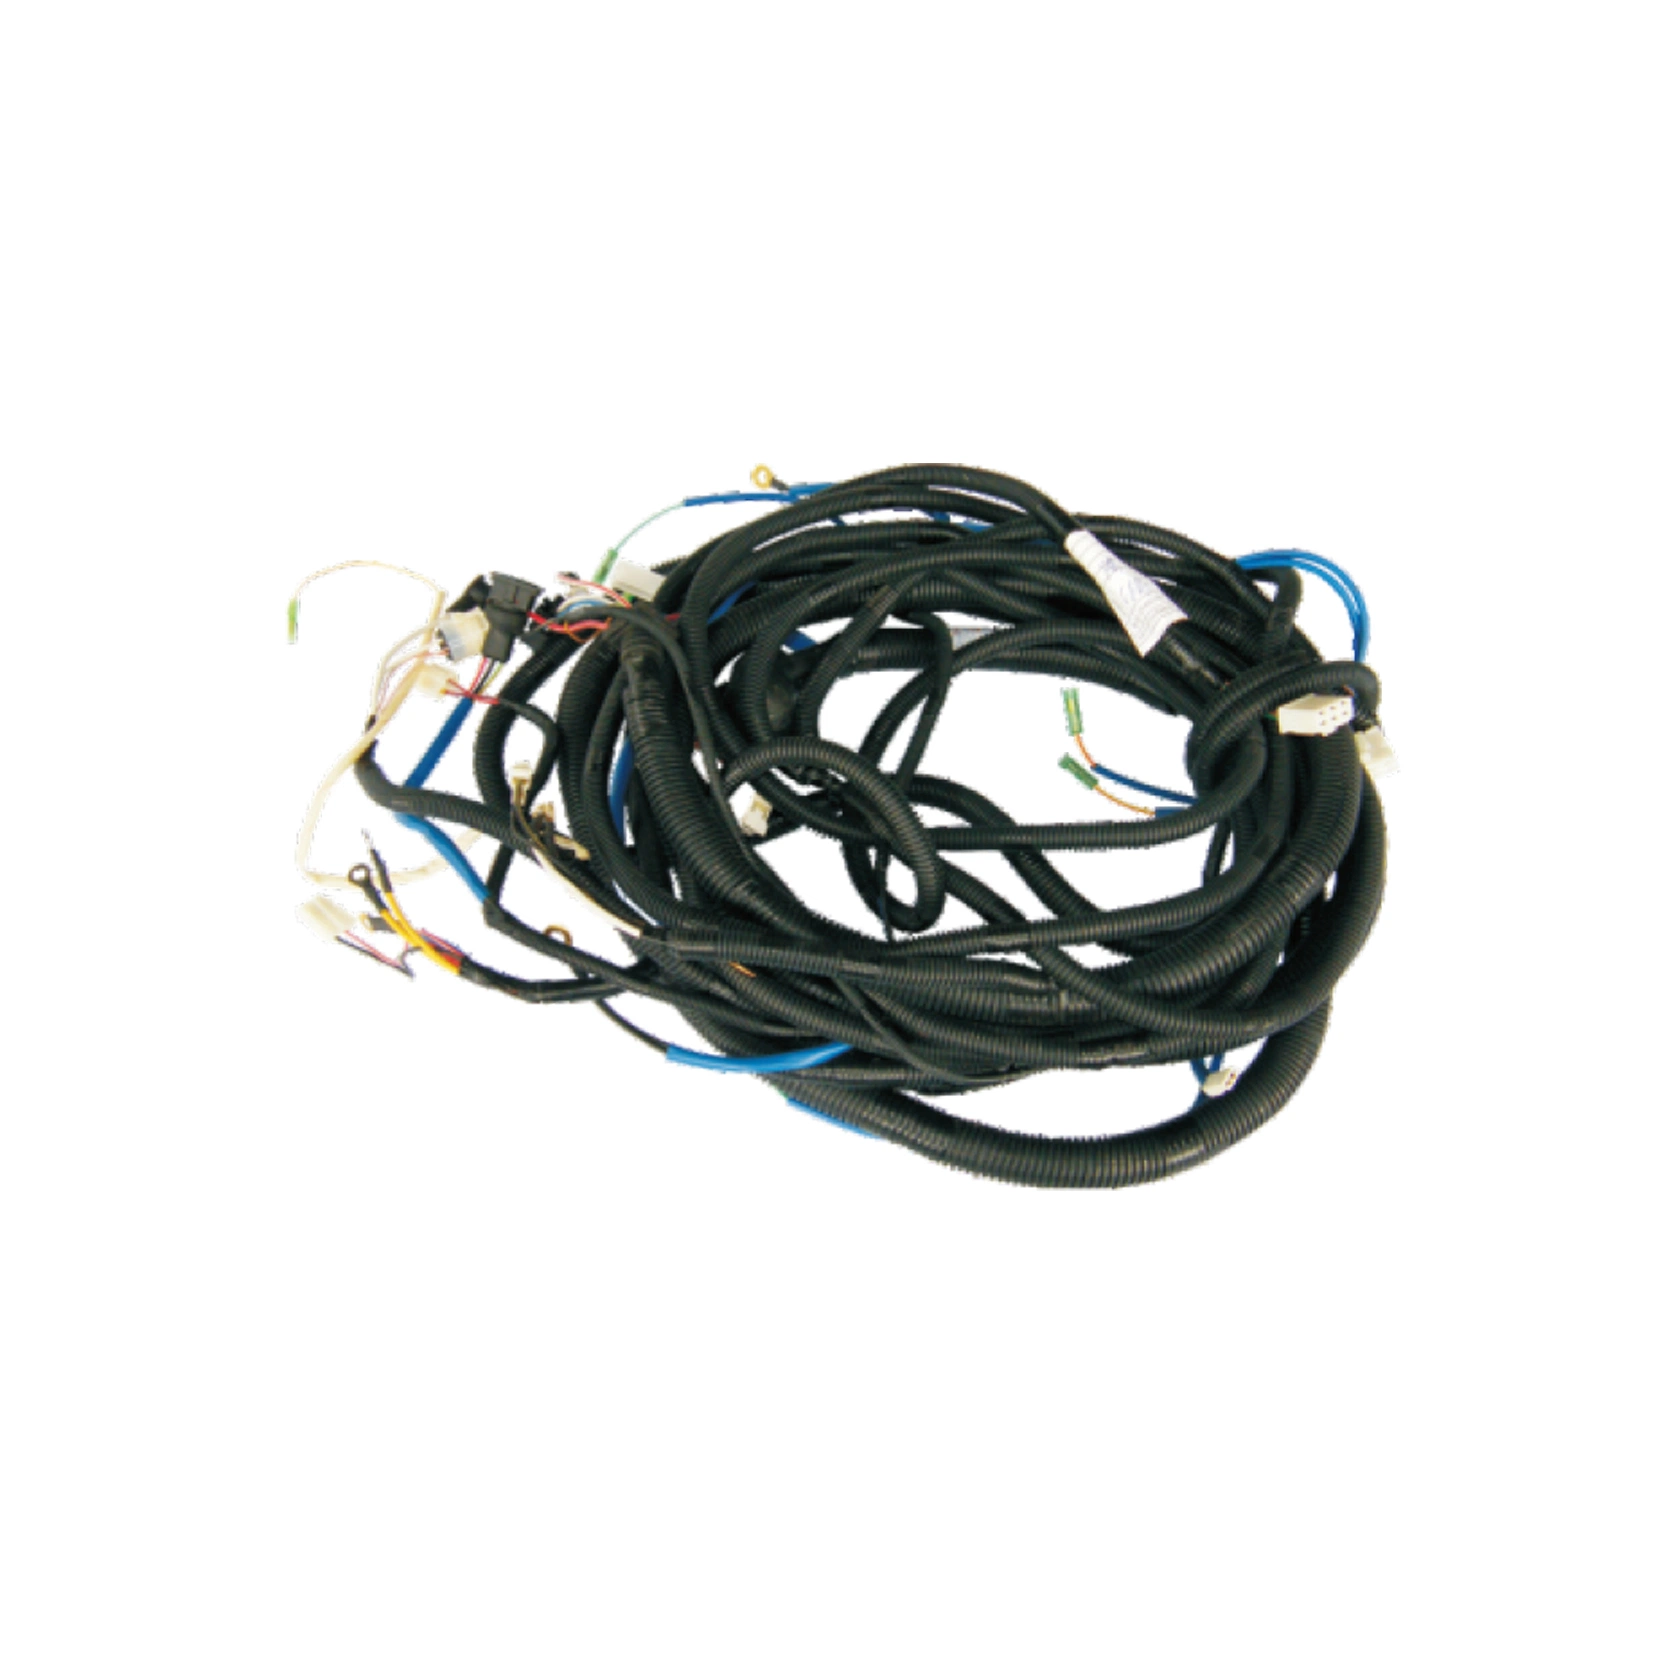 Custom Wire Harness Wire Harness Processing Customization Cable Harness Assembly